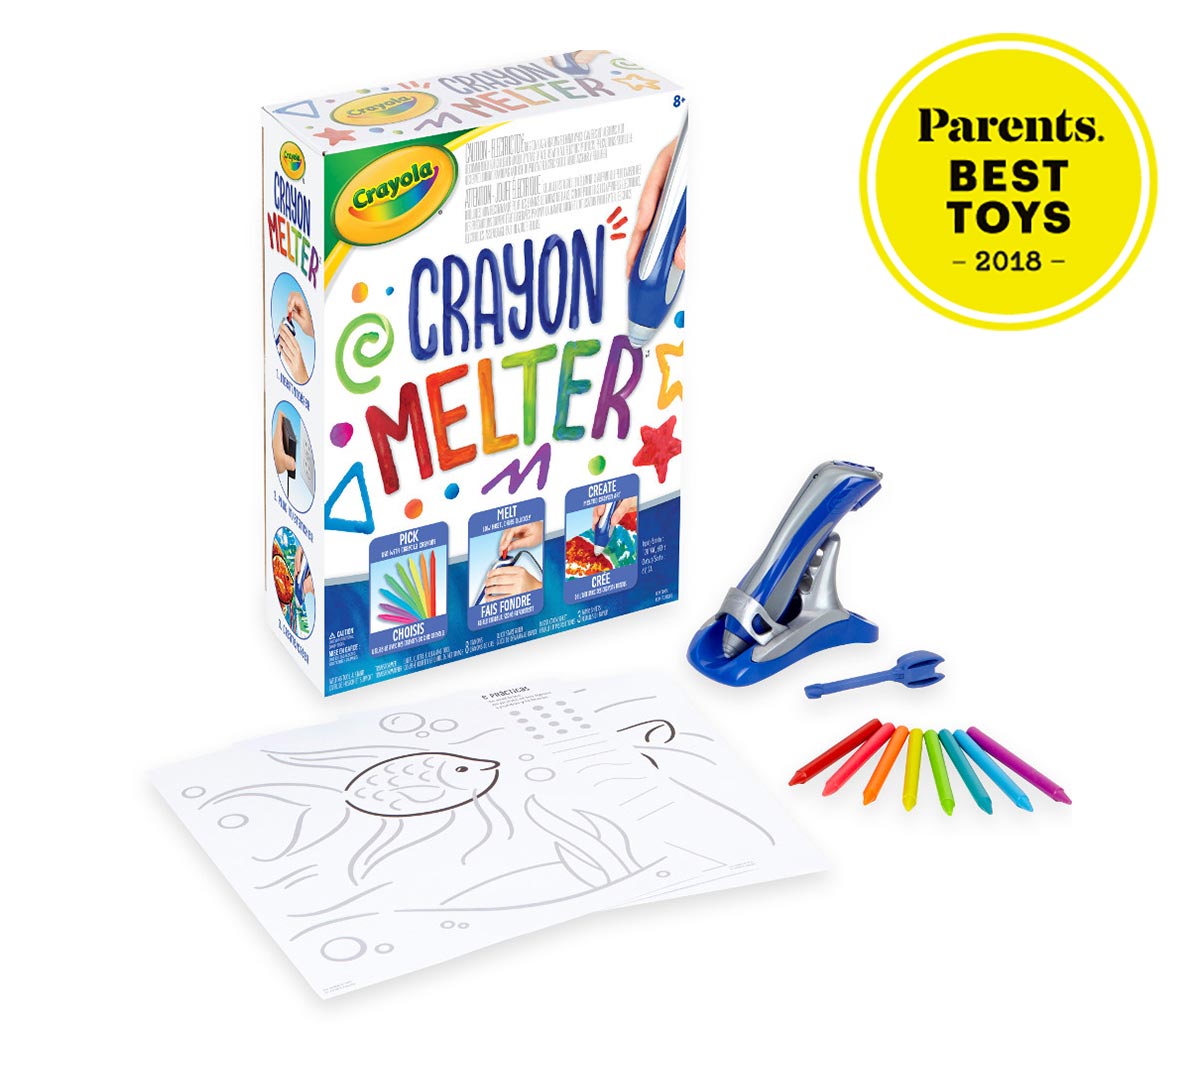 Download Crayola Crayon Melter, Create Art With Melted Crayons, 1 Crayon Melter, 8 Crayons, 3 Sheets ...